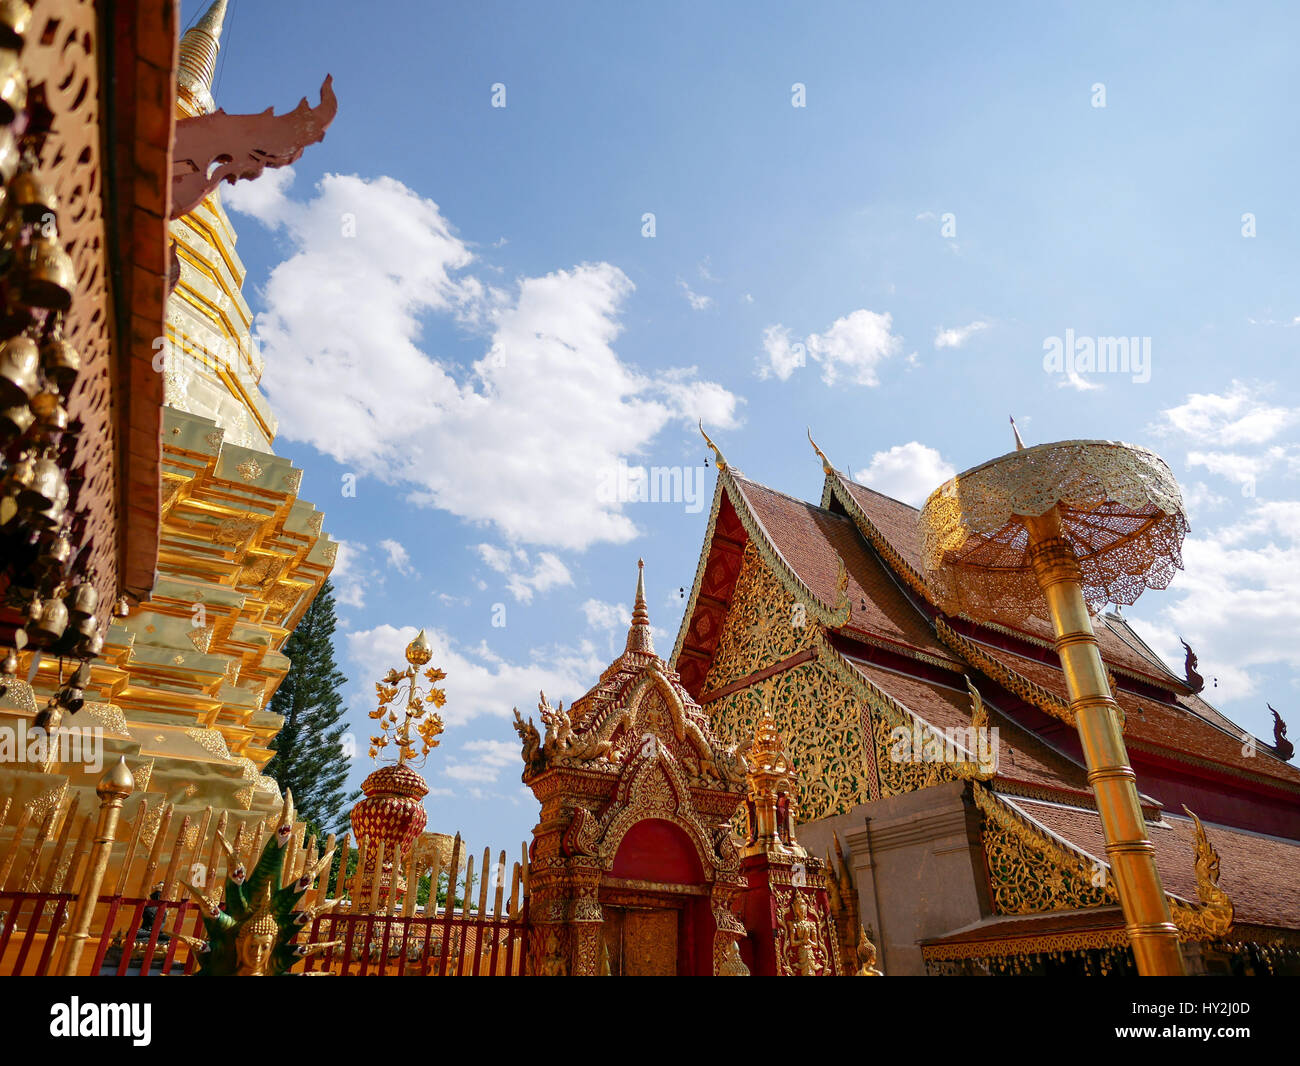 Wat Phra That Doi Kham (Temple of the Golden Mountain) in Chiang Mai, Thailand Stock Photo